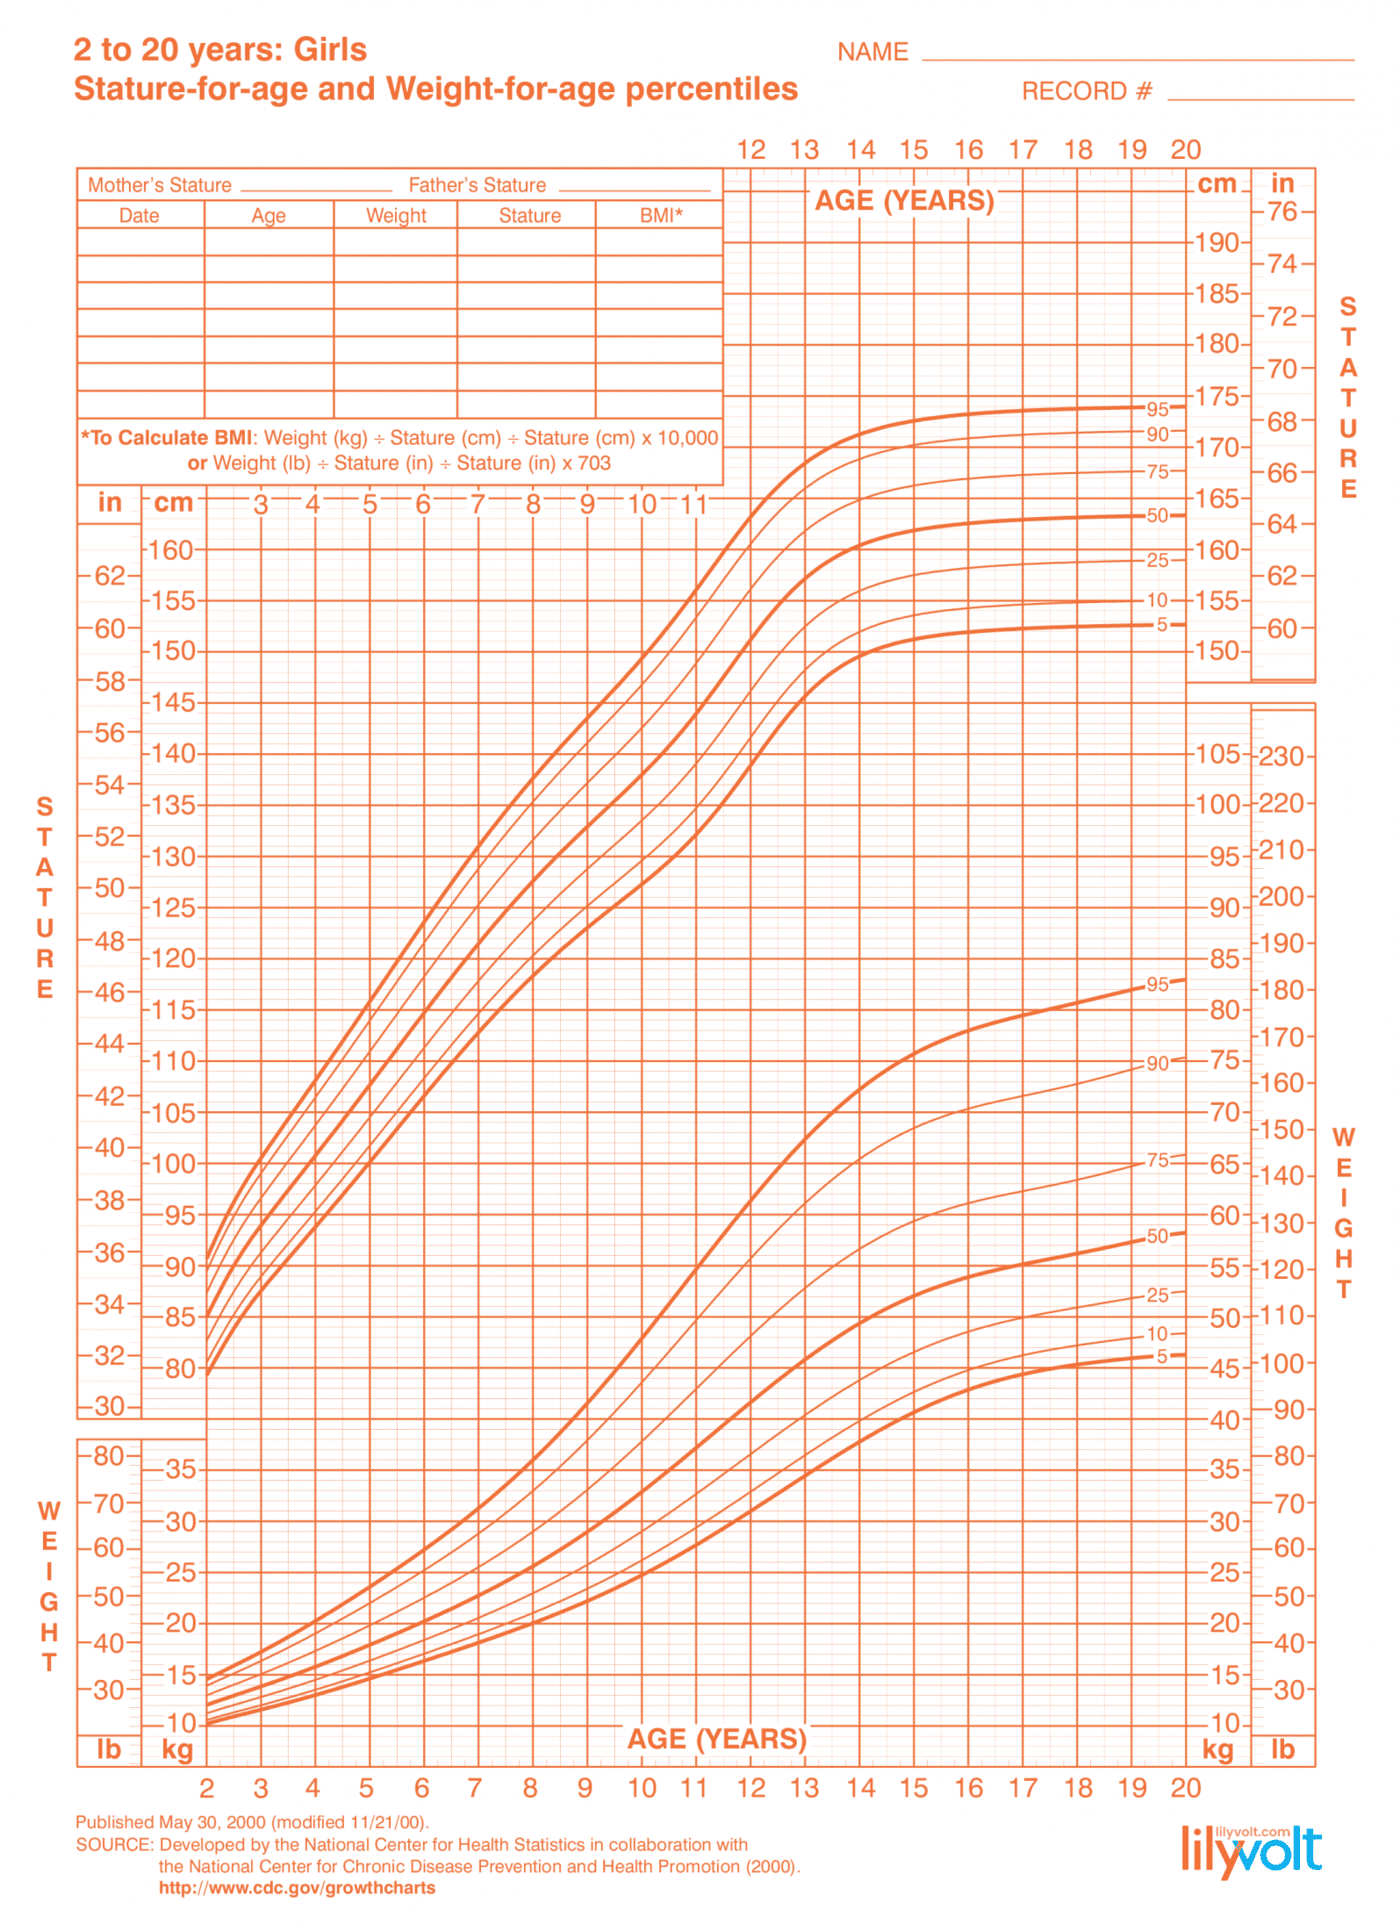 Girls growth chart for 2 to 20 years CDC - From Lilyvolt